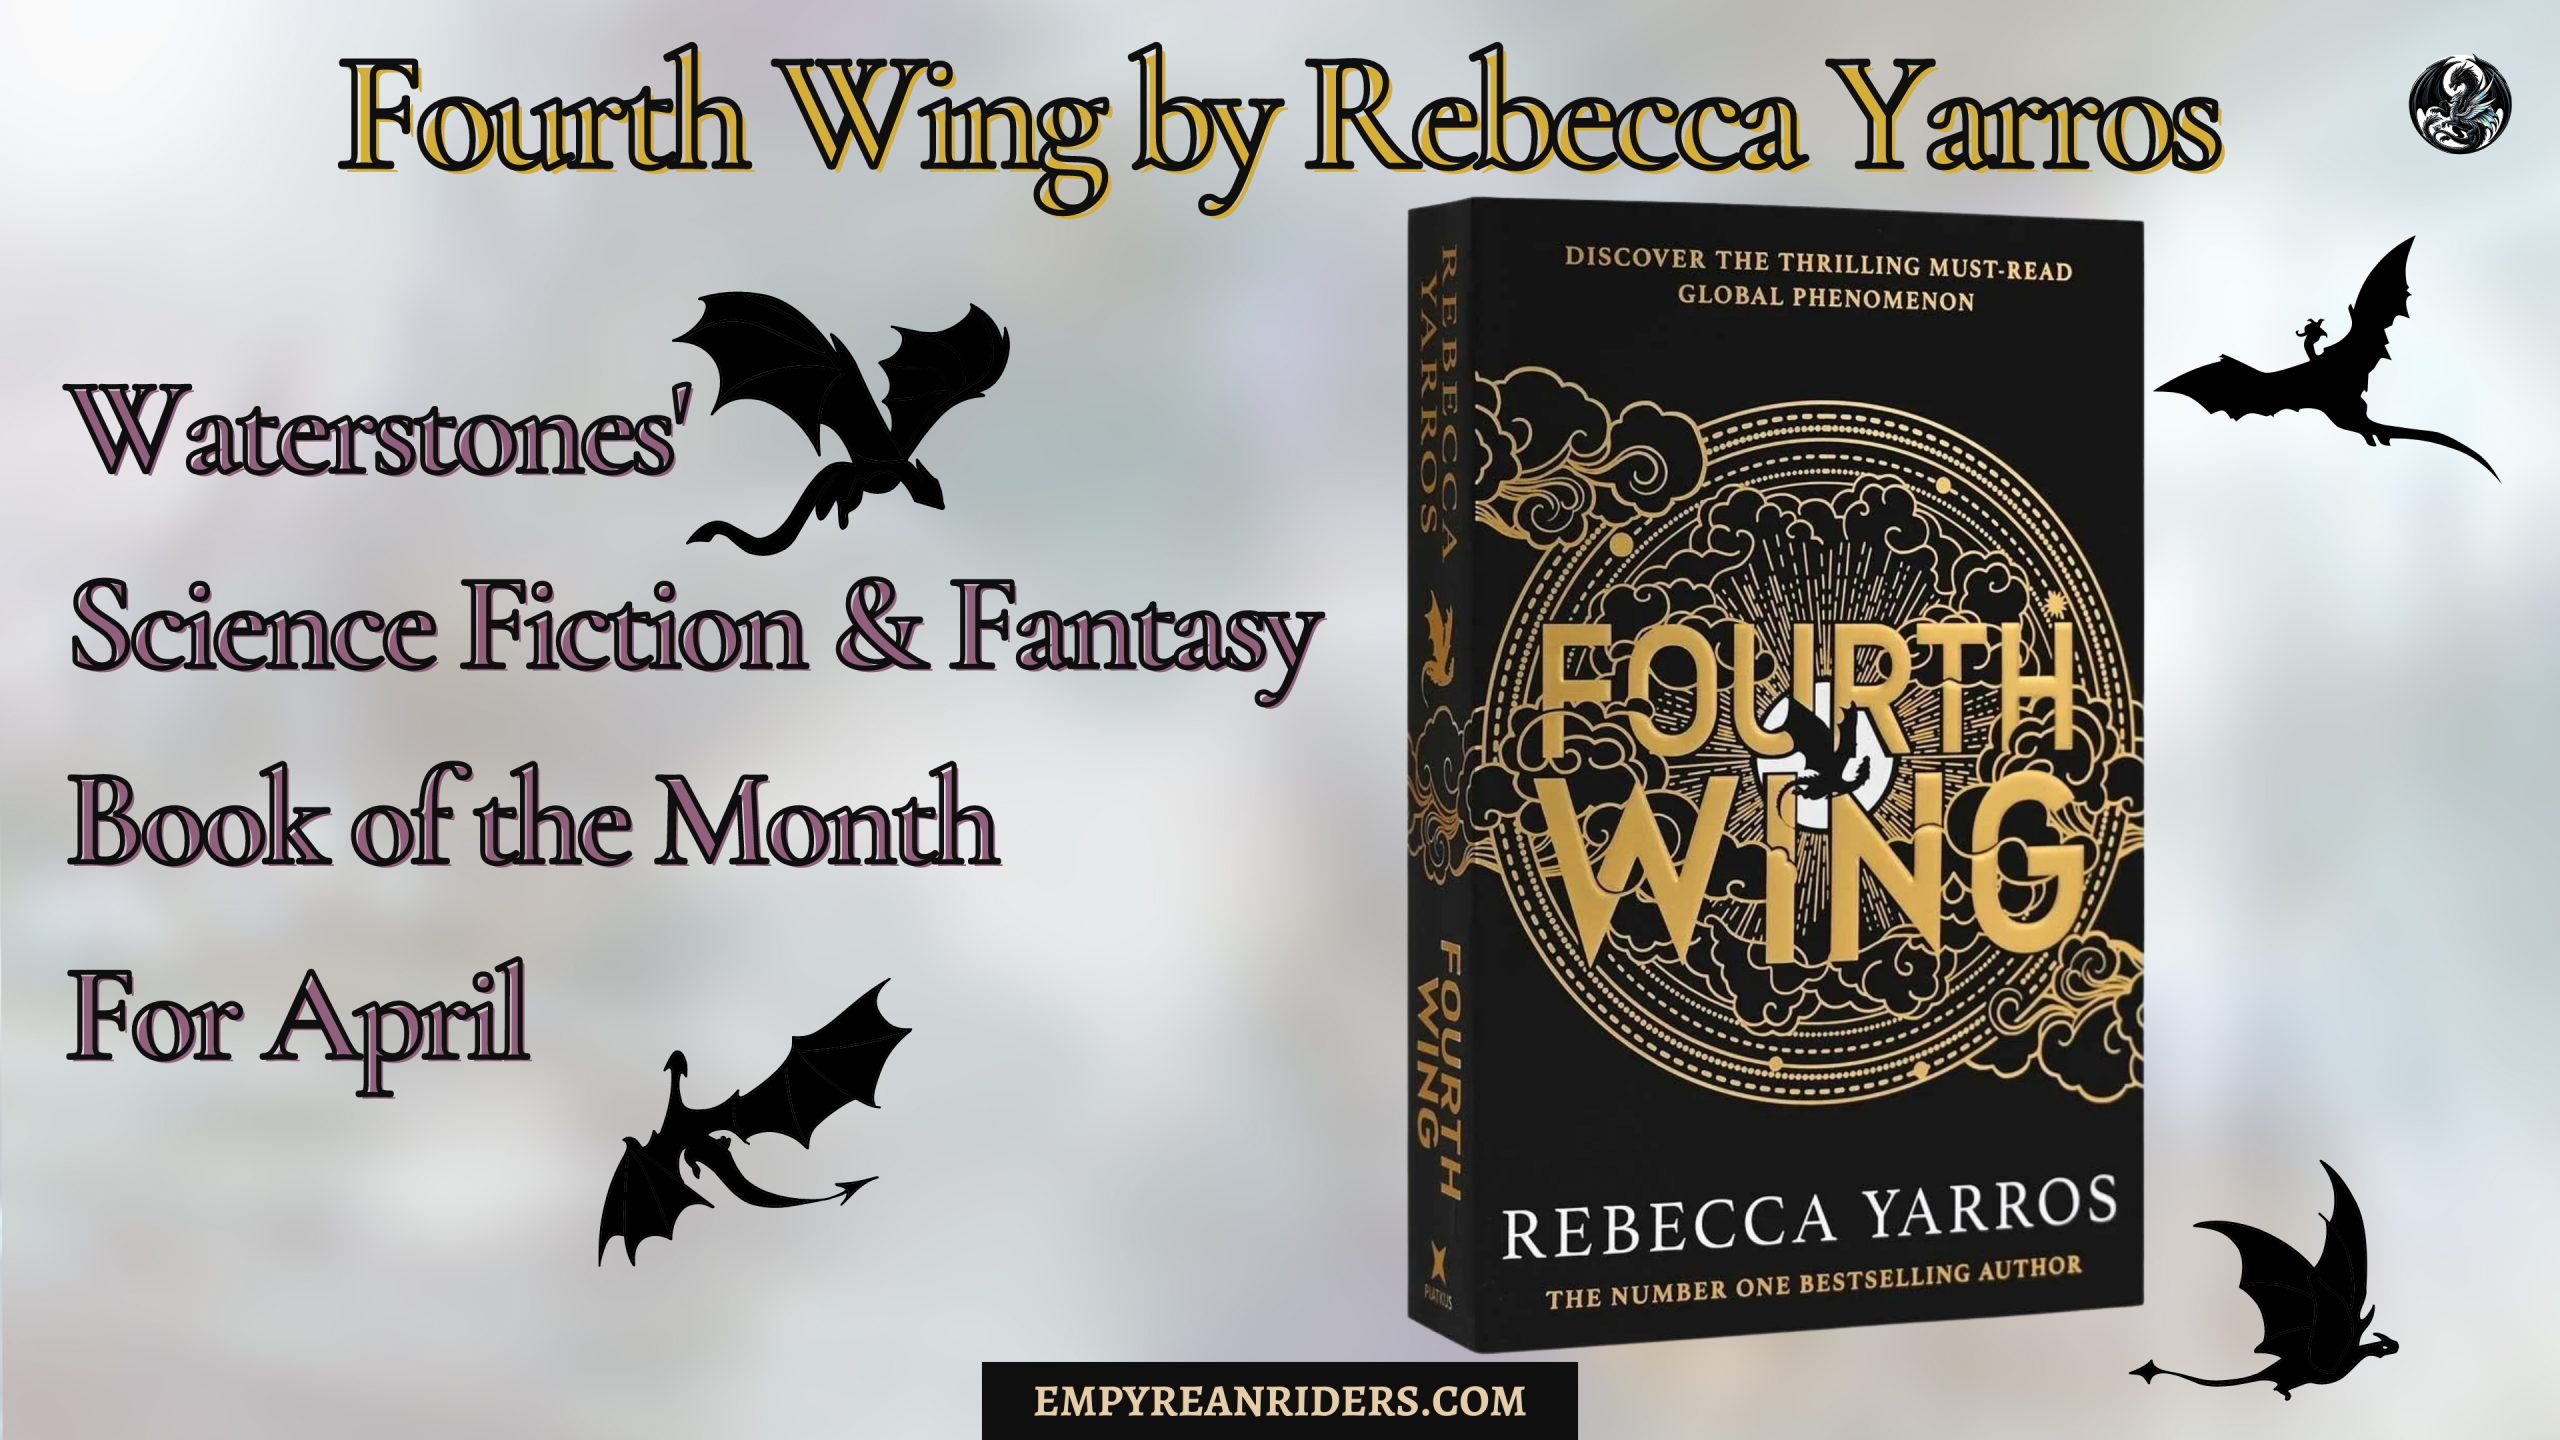 Fourth Wing is Waterstones' Science Fiction & Fantasy Book of the Month for April